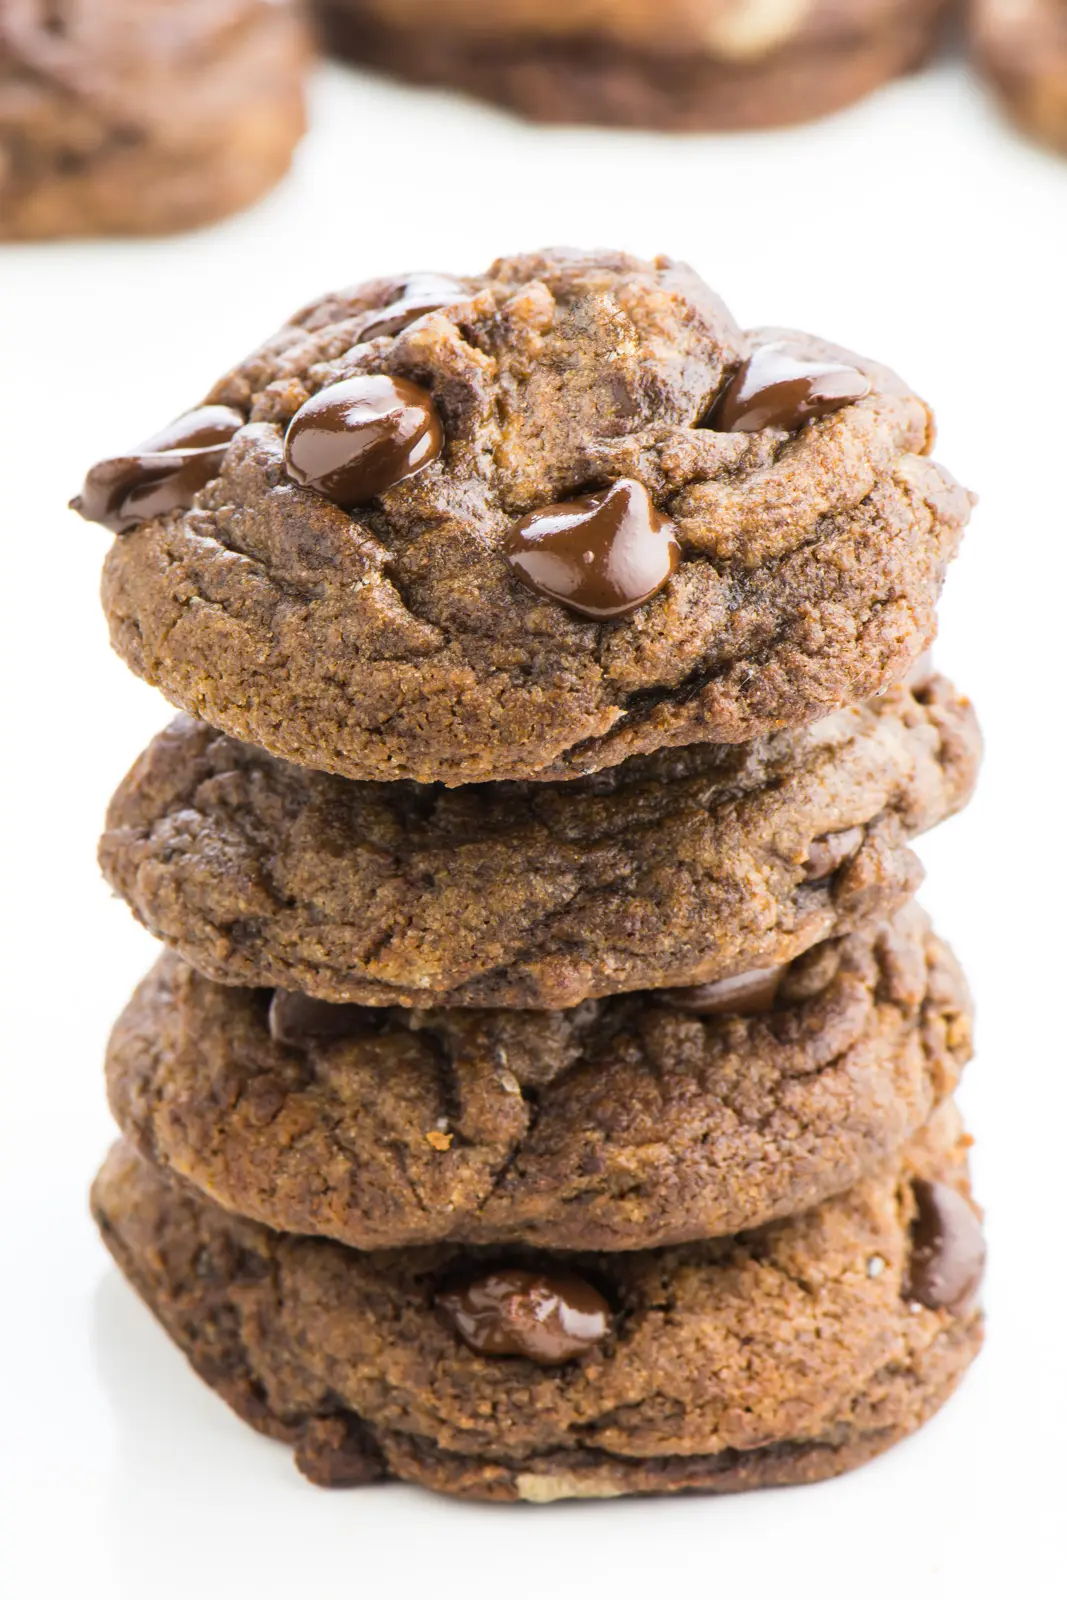 A stack of four vegan chocolate chocolate chip cookies sit one on top of the other. The chips are still warm and shining in the light. There are more cookies in the background.